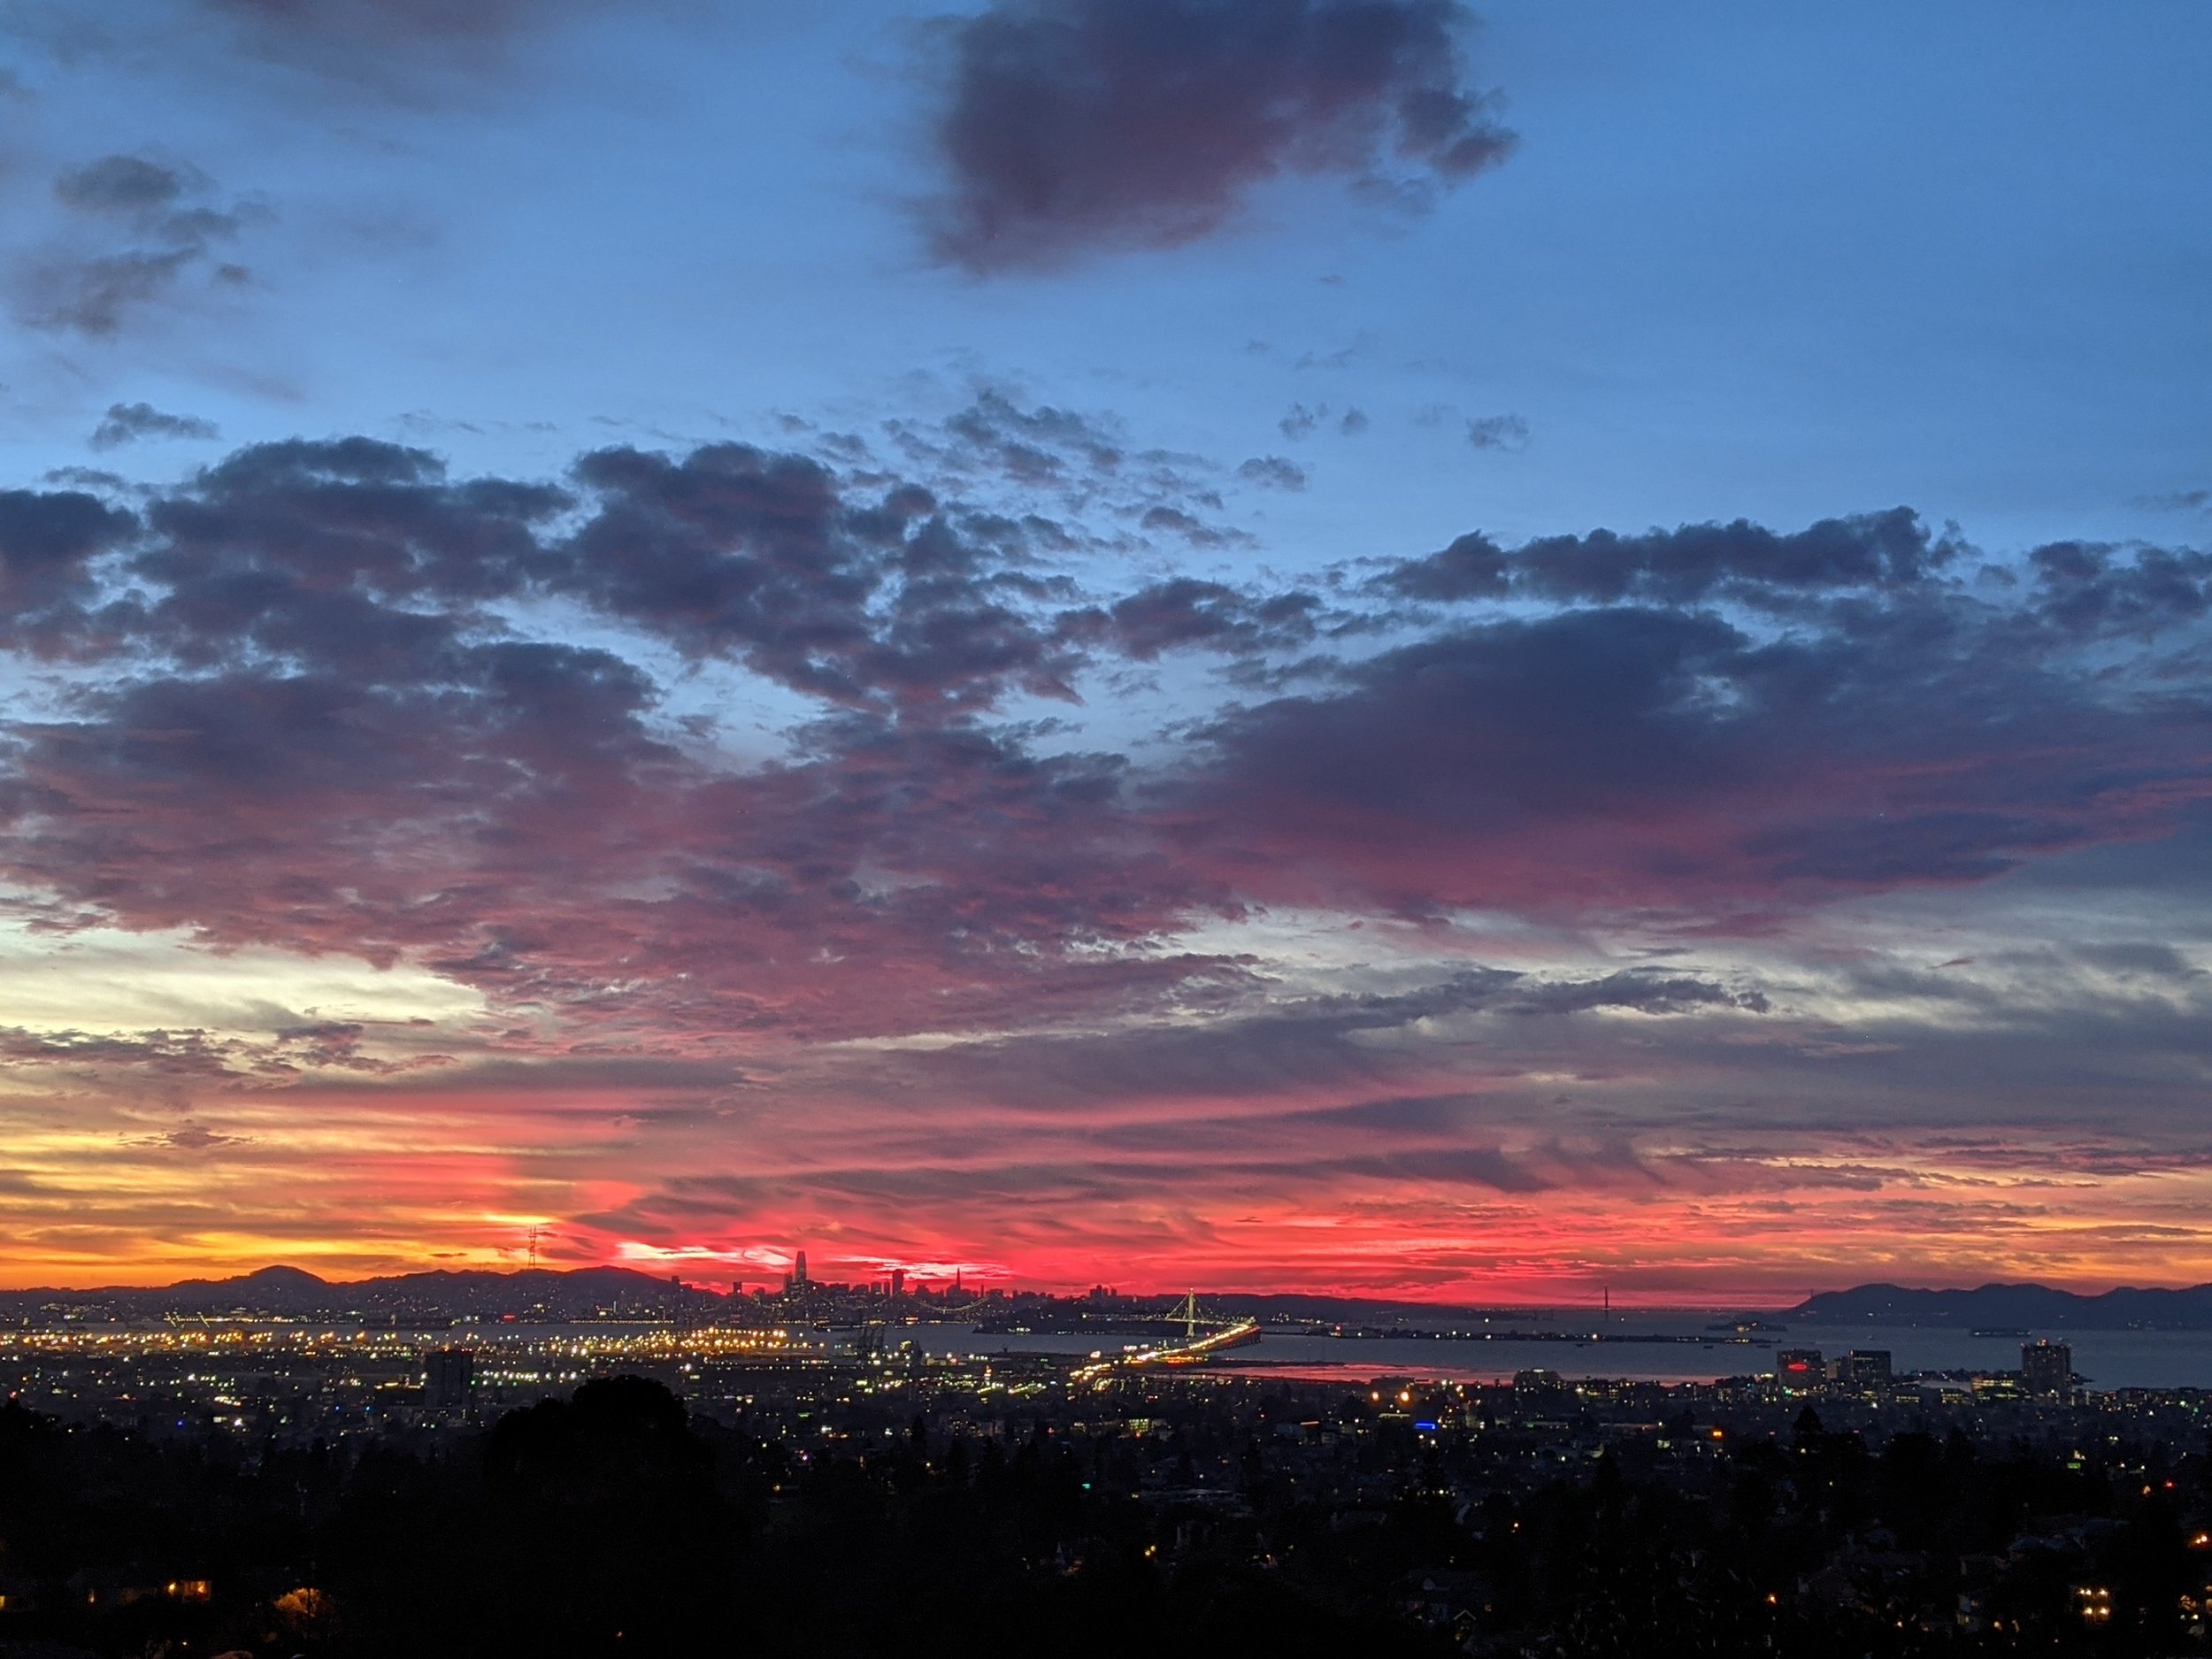 I’m grateful for the incredible Bay Area sunsets" -Erin